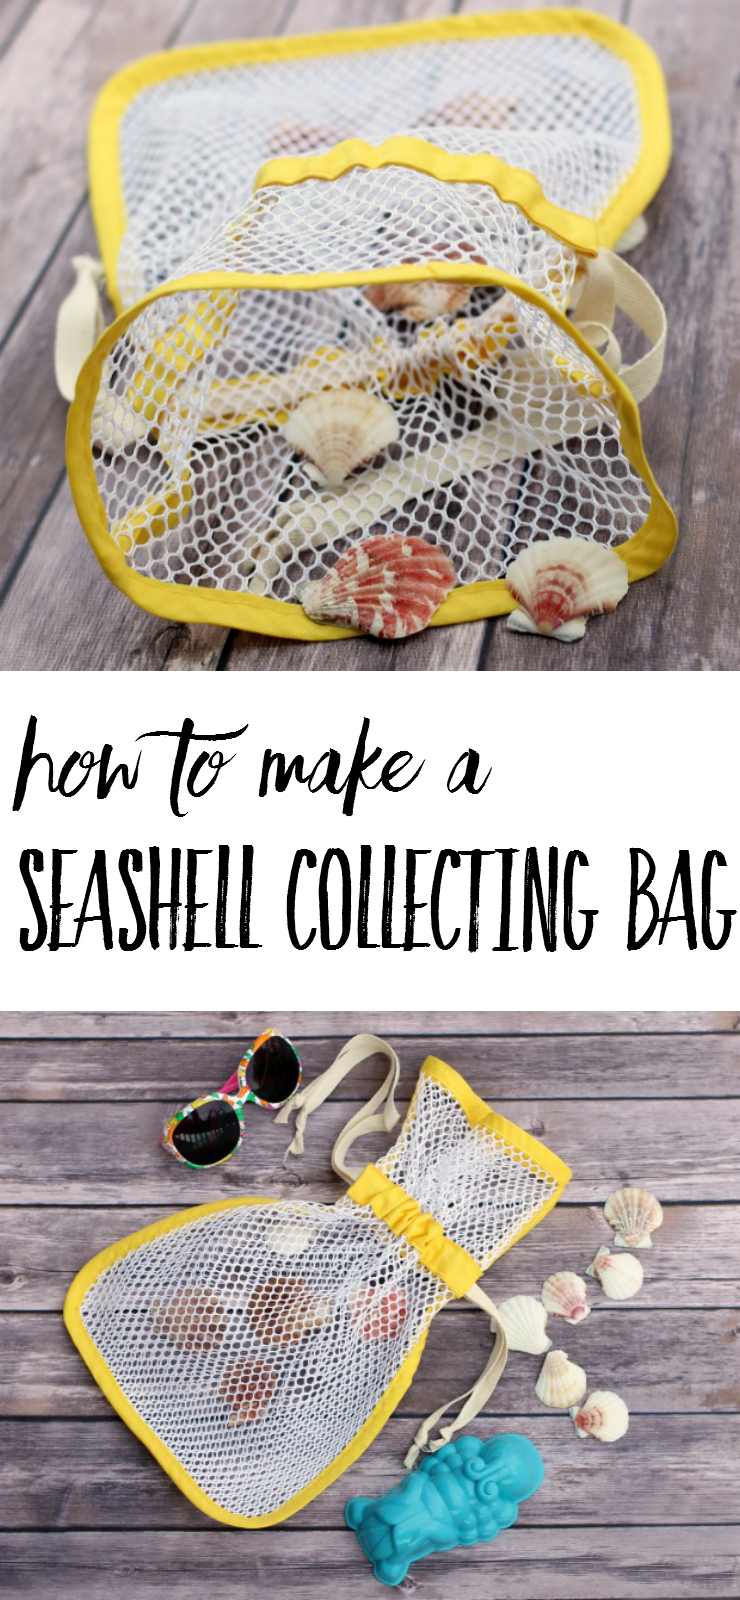 How to make a seashell collecting bag! This is a simple sewing tutorial for making a mesh bag to carry seashells in. Leave the sand at the beach and bring the treasures home! Perfect summer sewing project. 